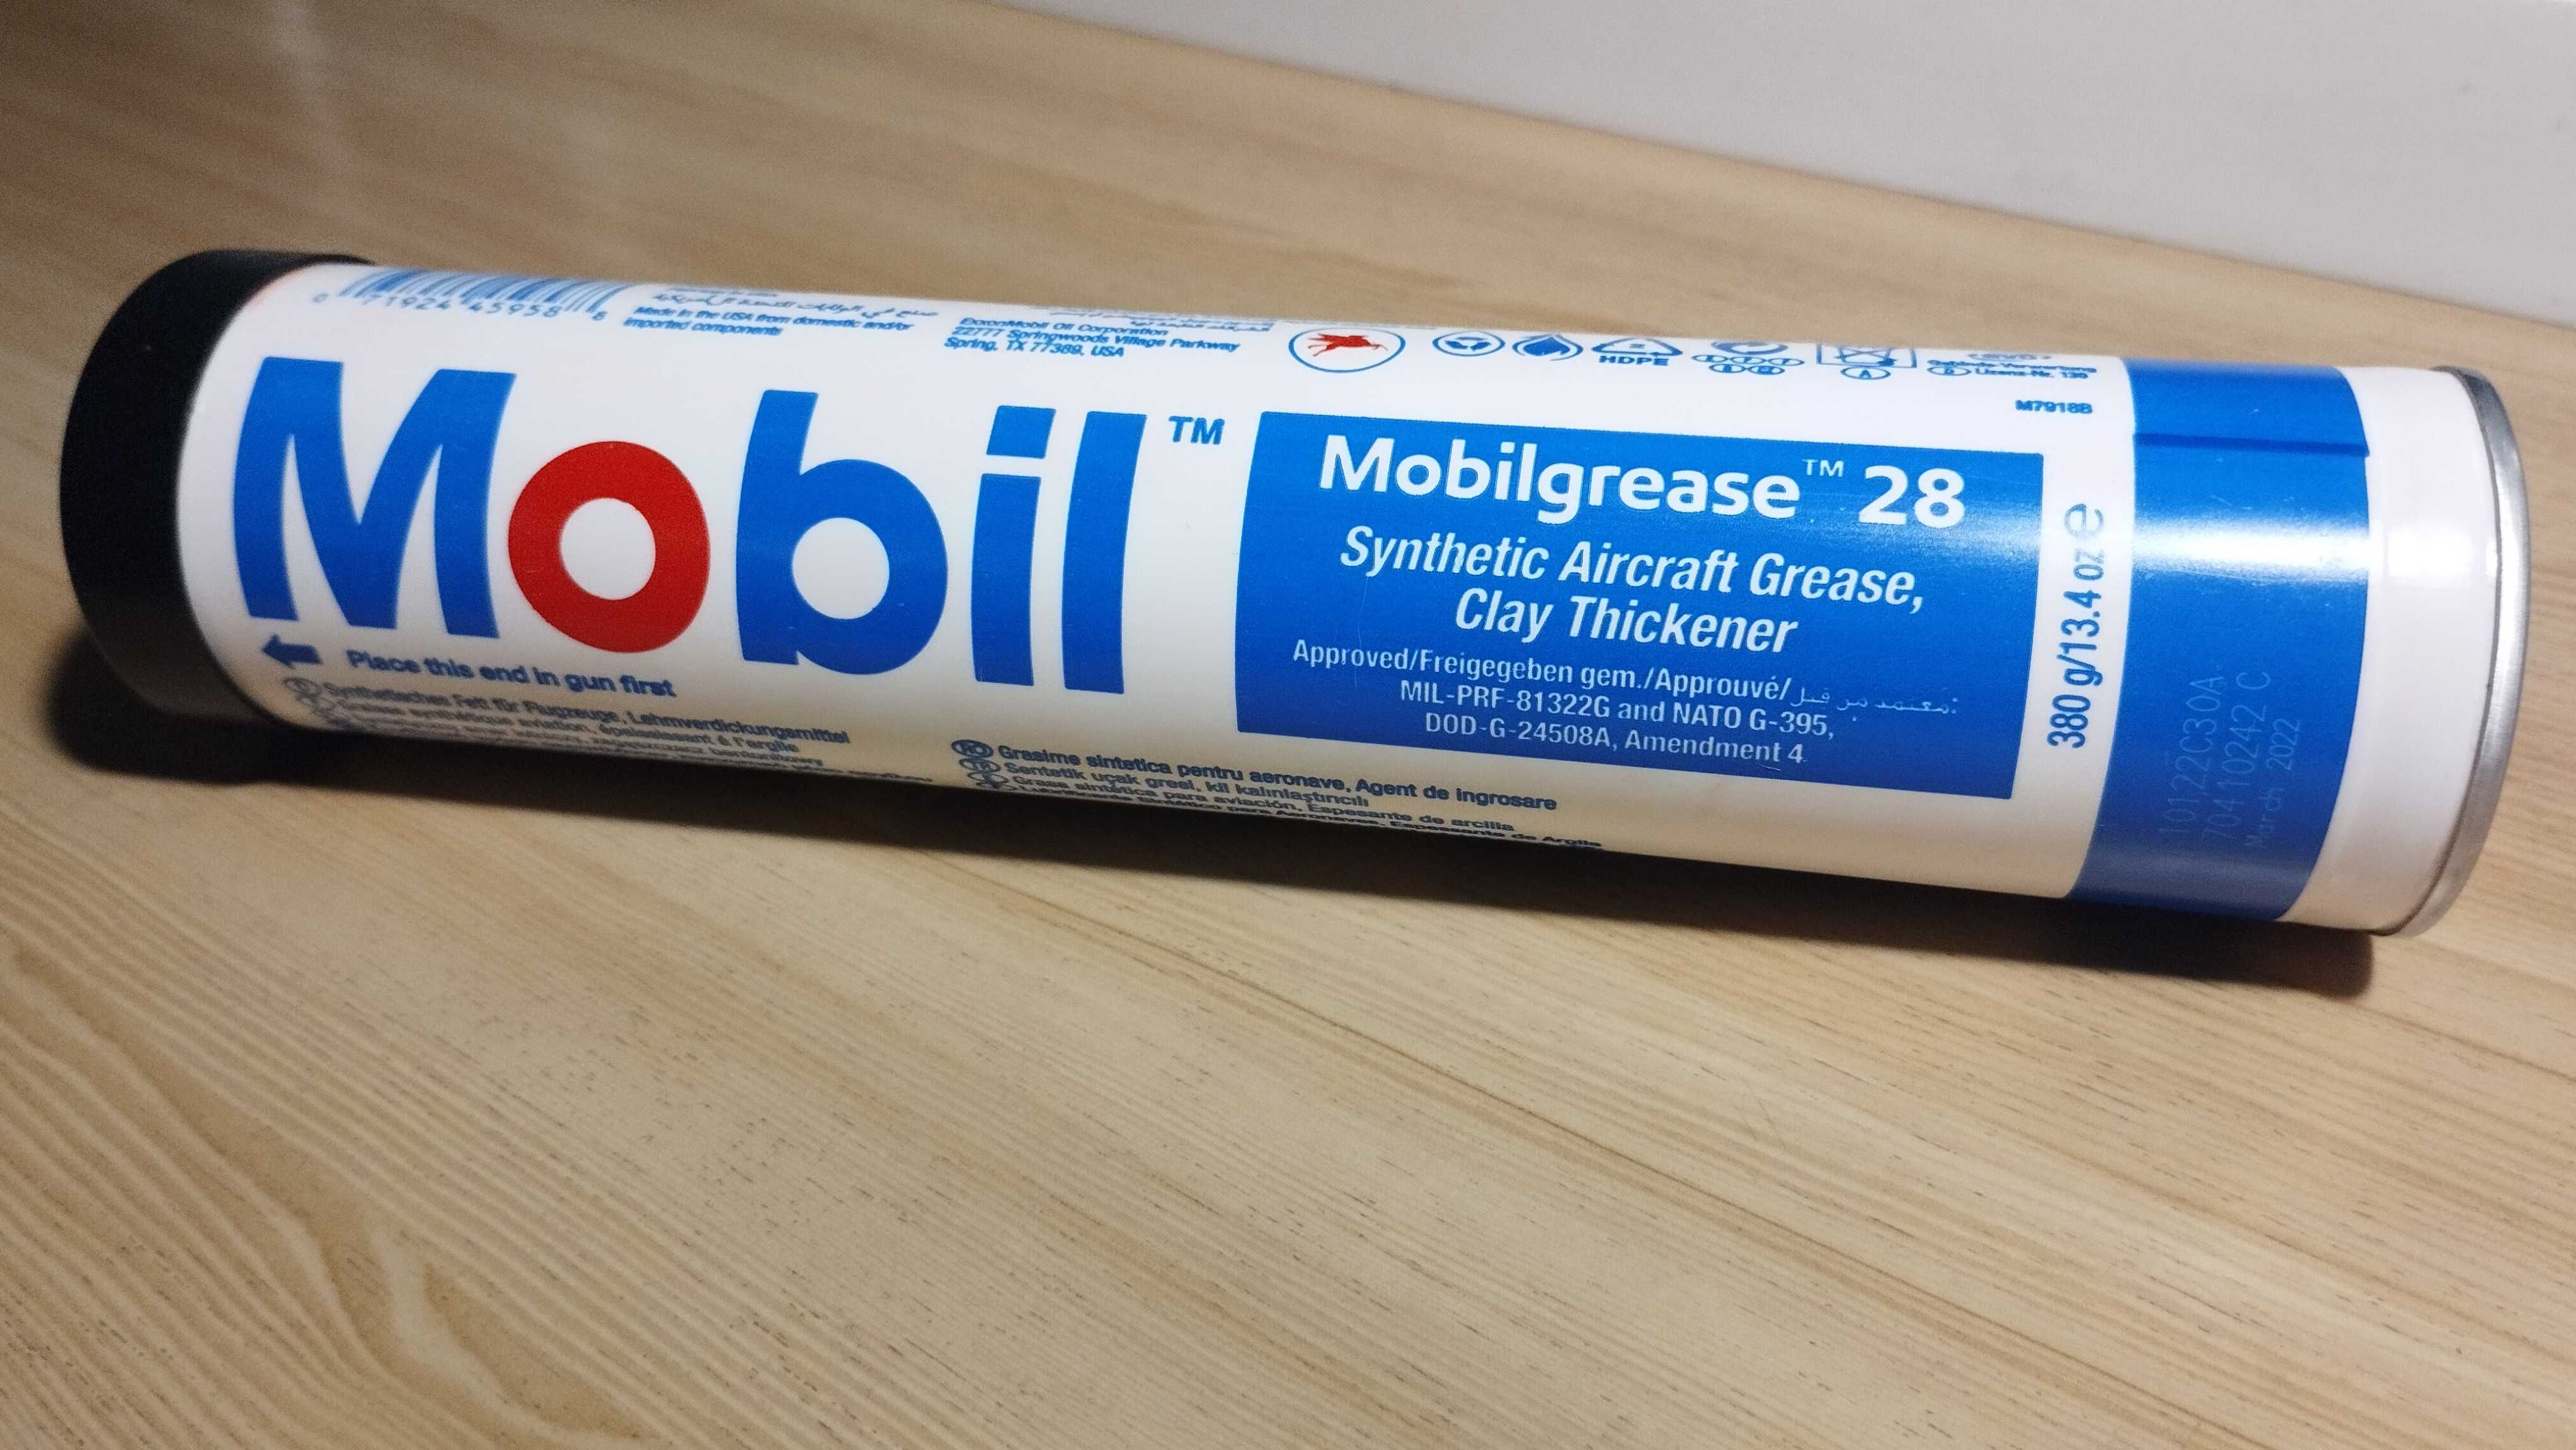 Мастило \ Змазка \ Смаска - Mobilgrease 28 \ Mobil grease 28